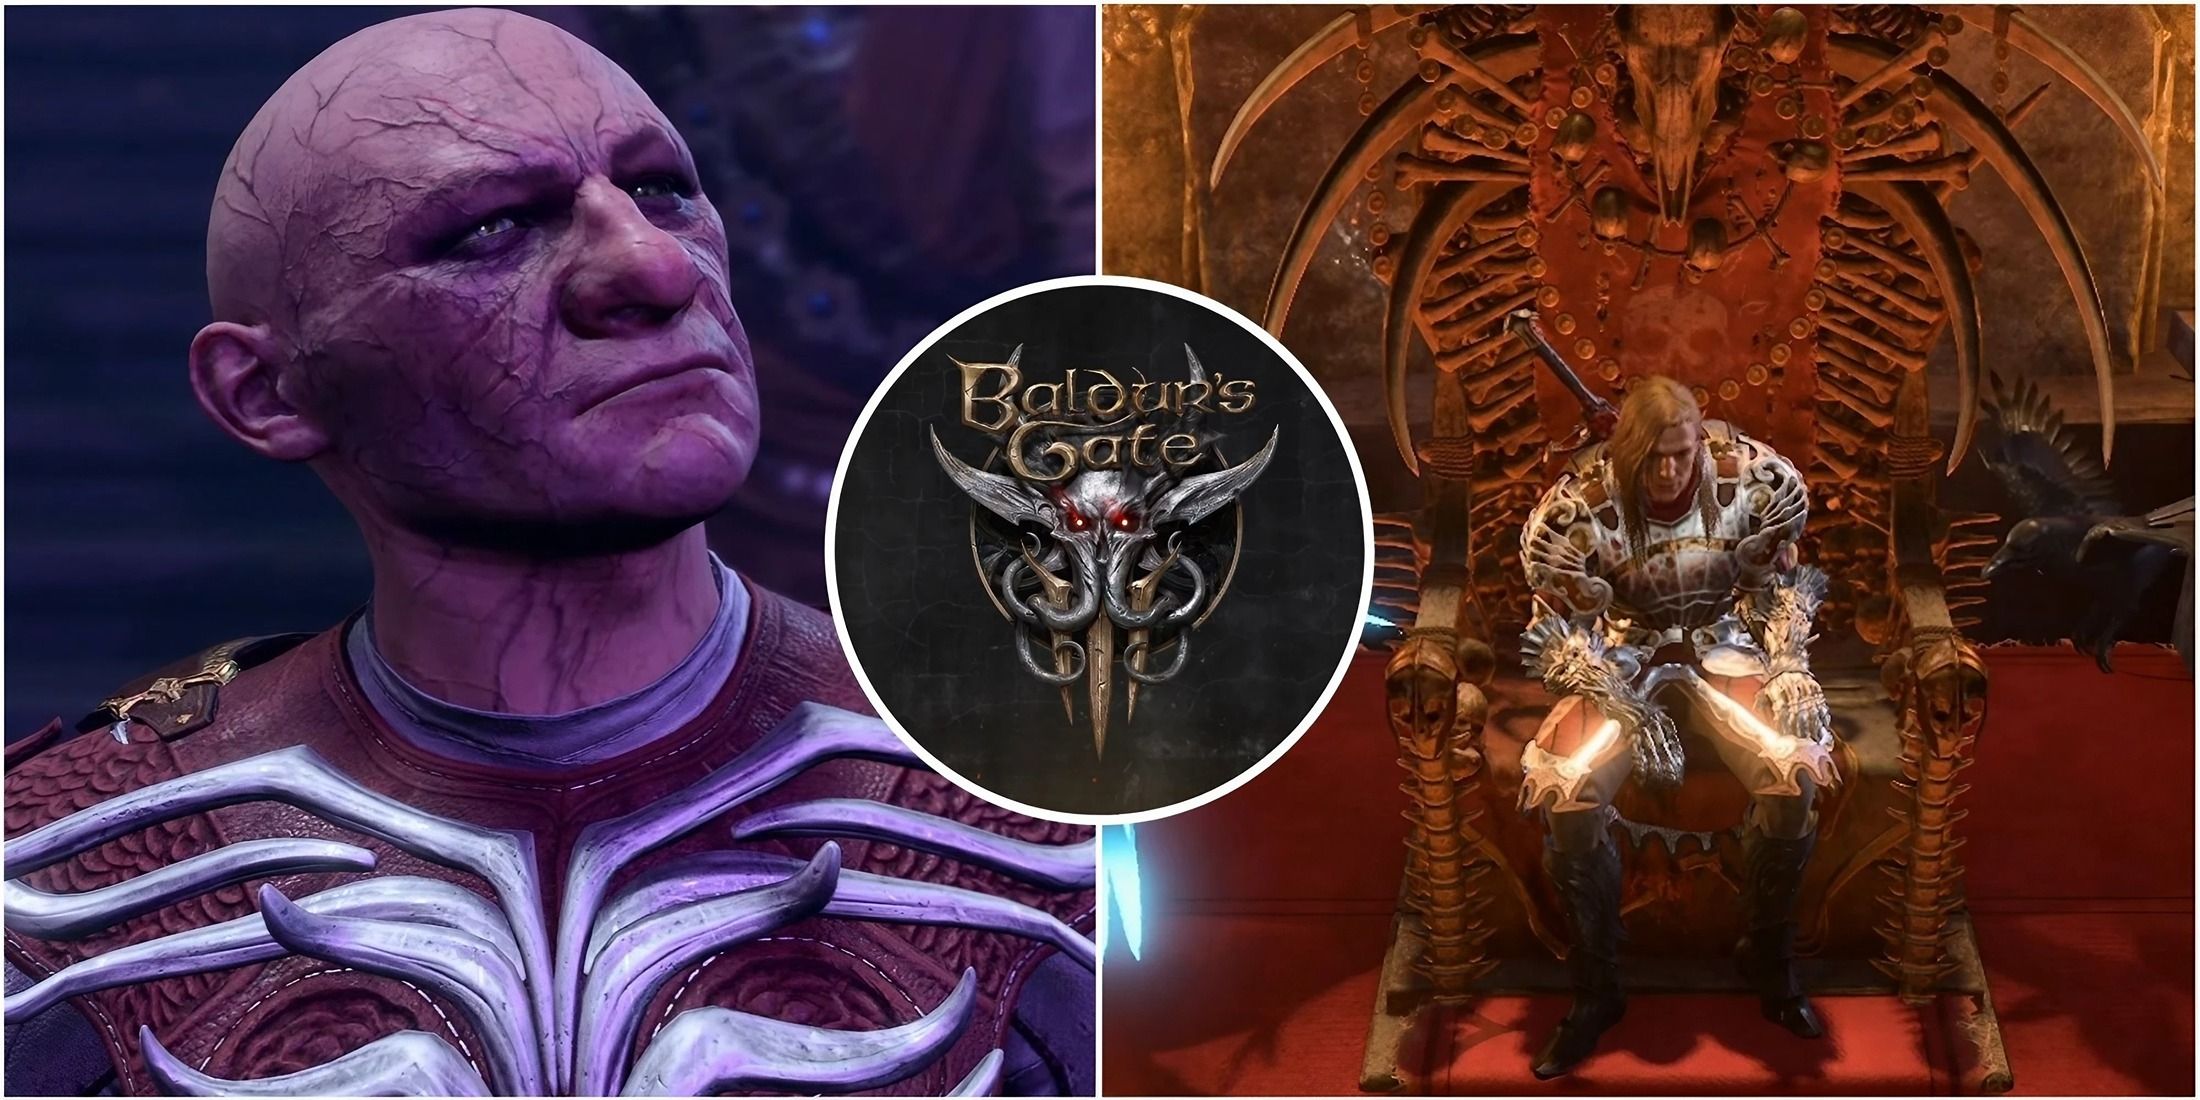 Featured image for Baldur's Gate 3 showcasing two unique characters